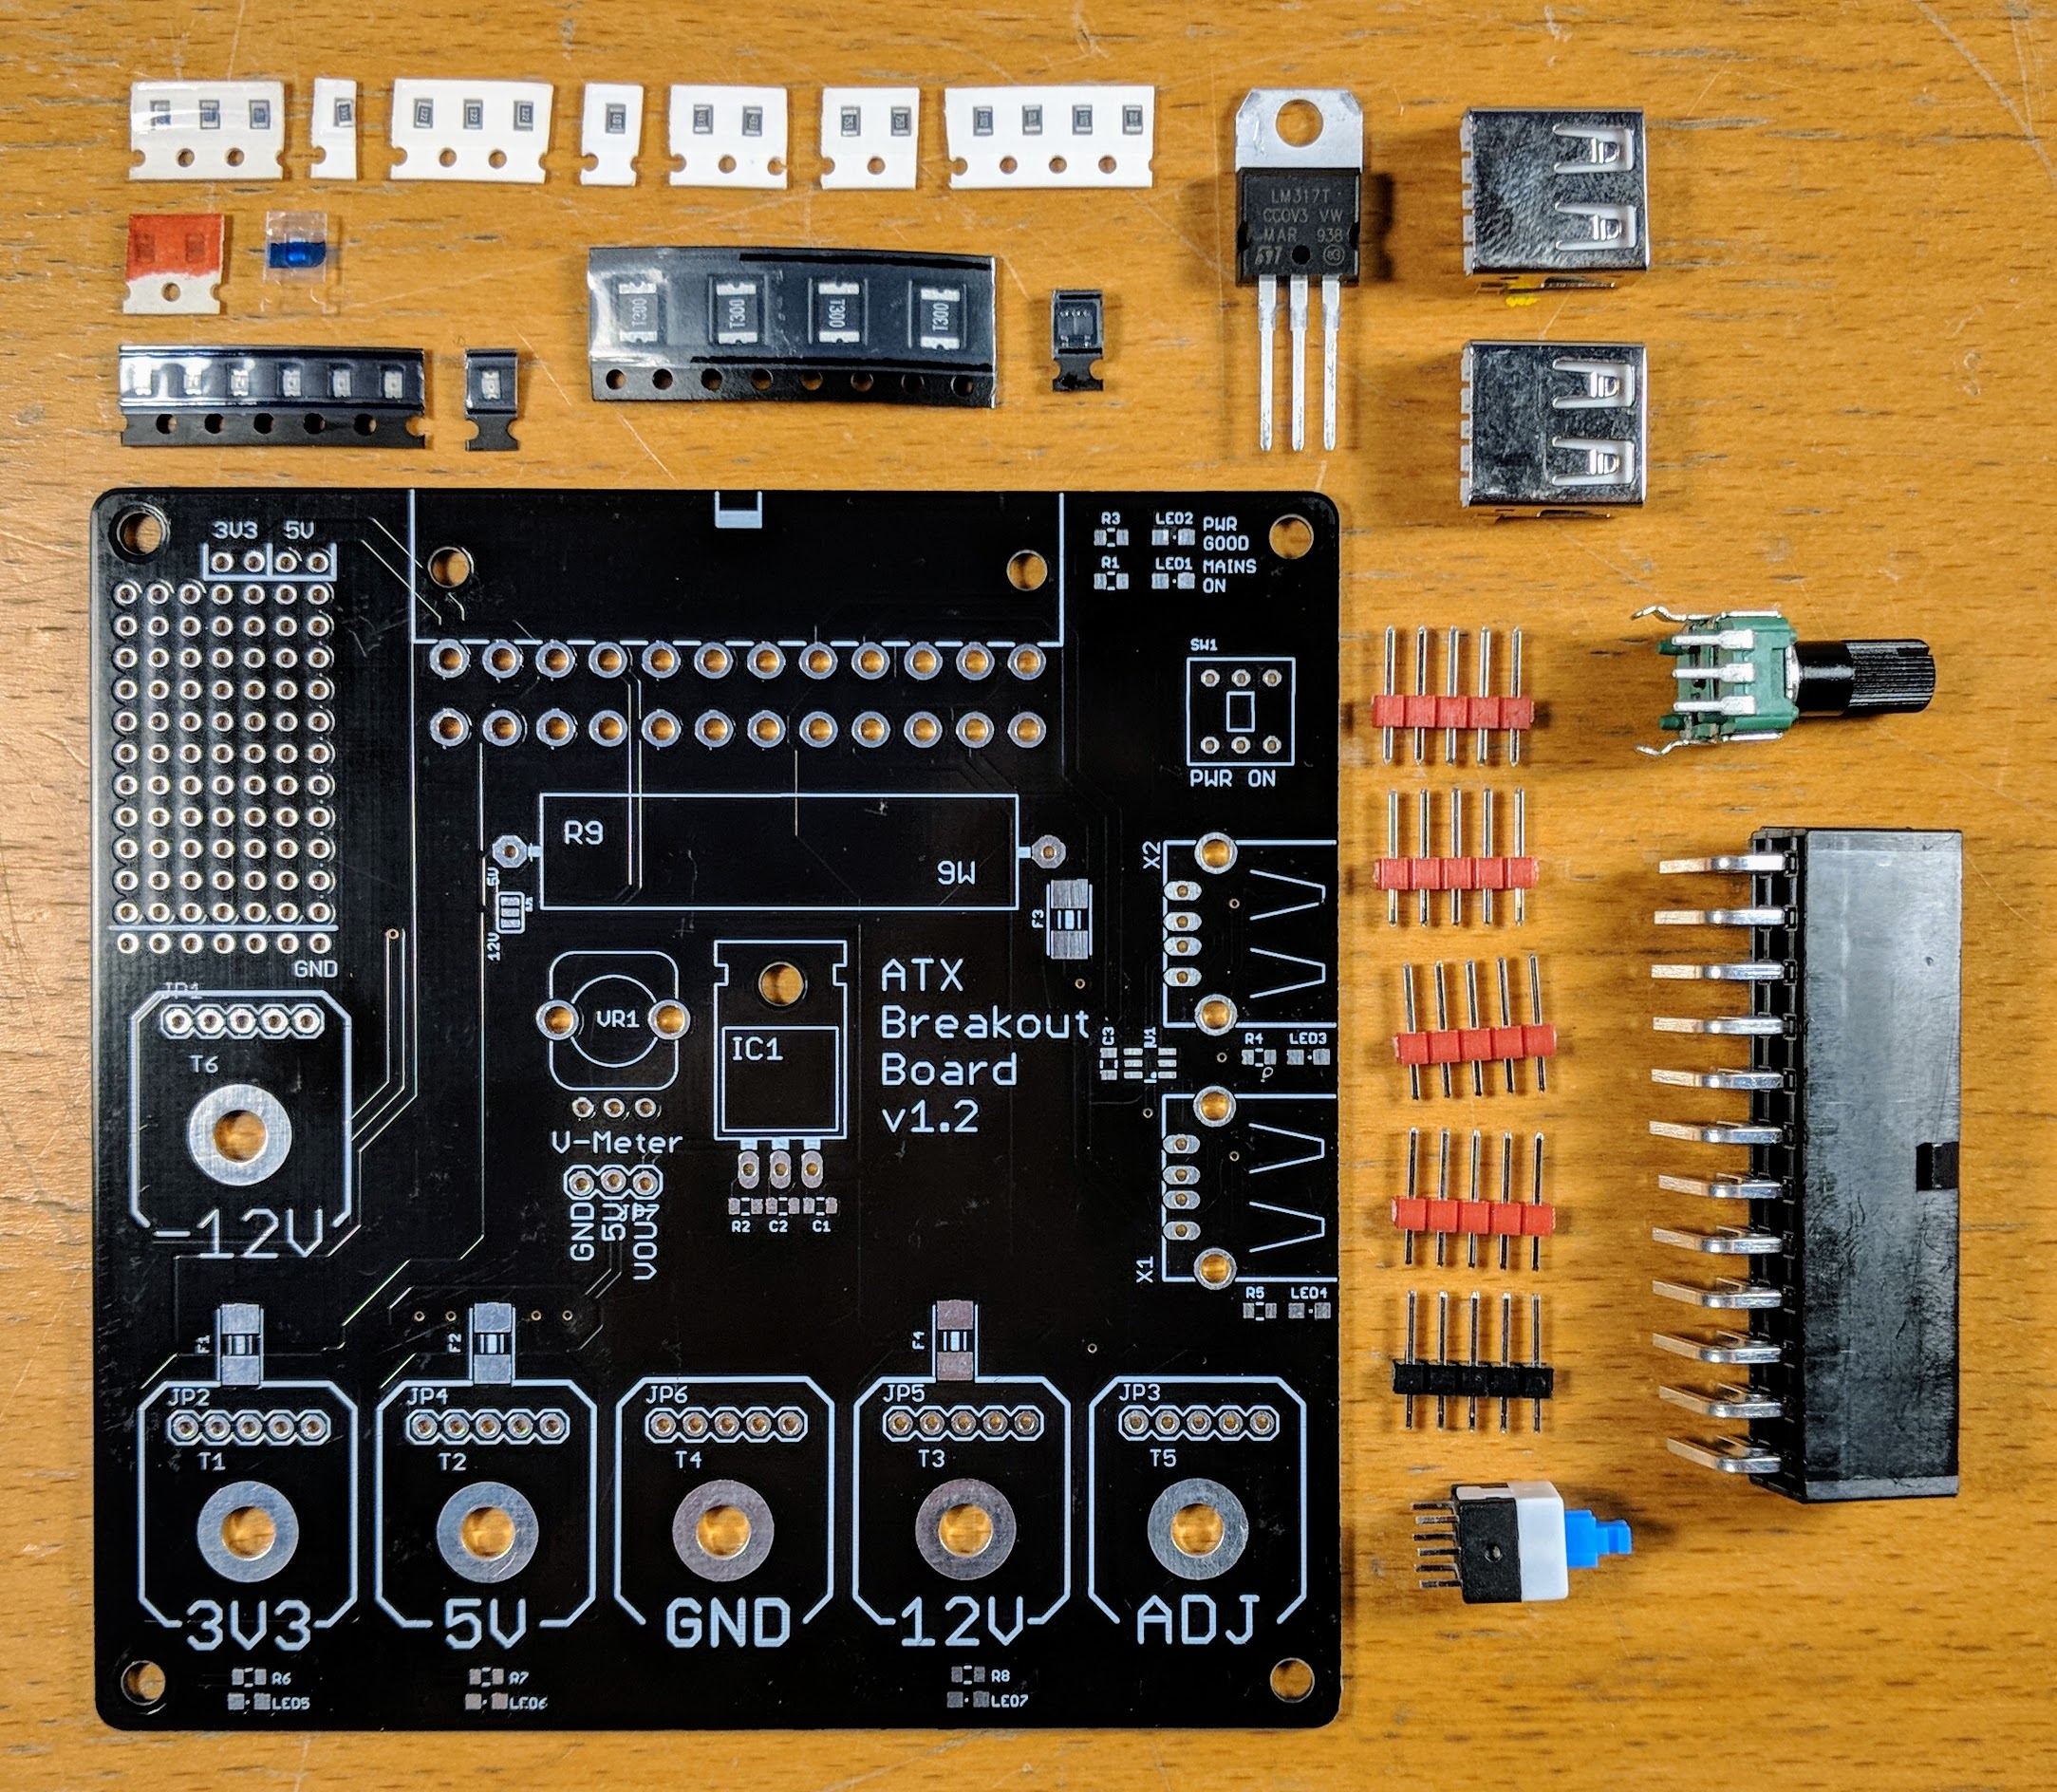 ATX Breakout Board - A practical kit for your lab power supply at home